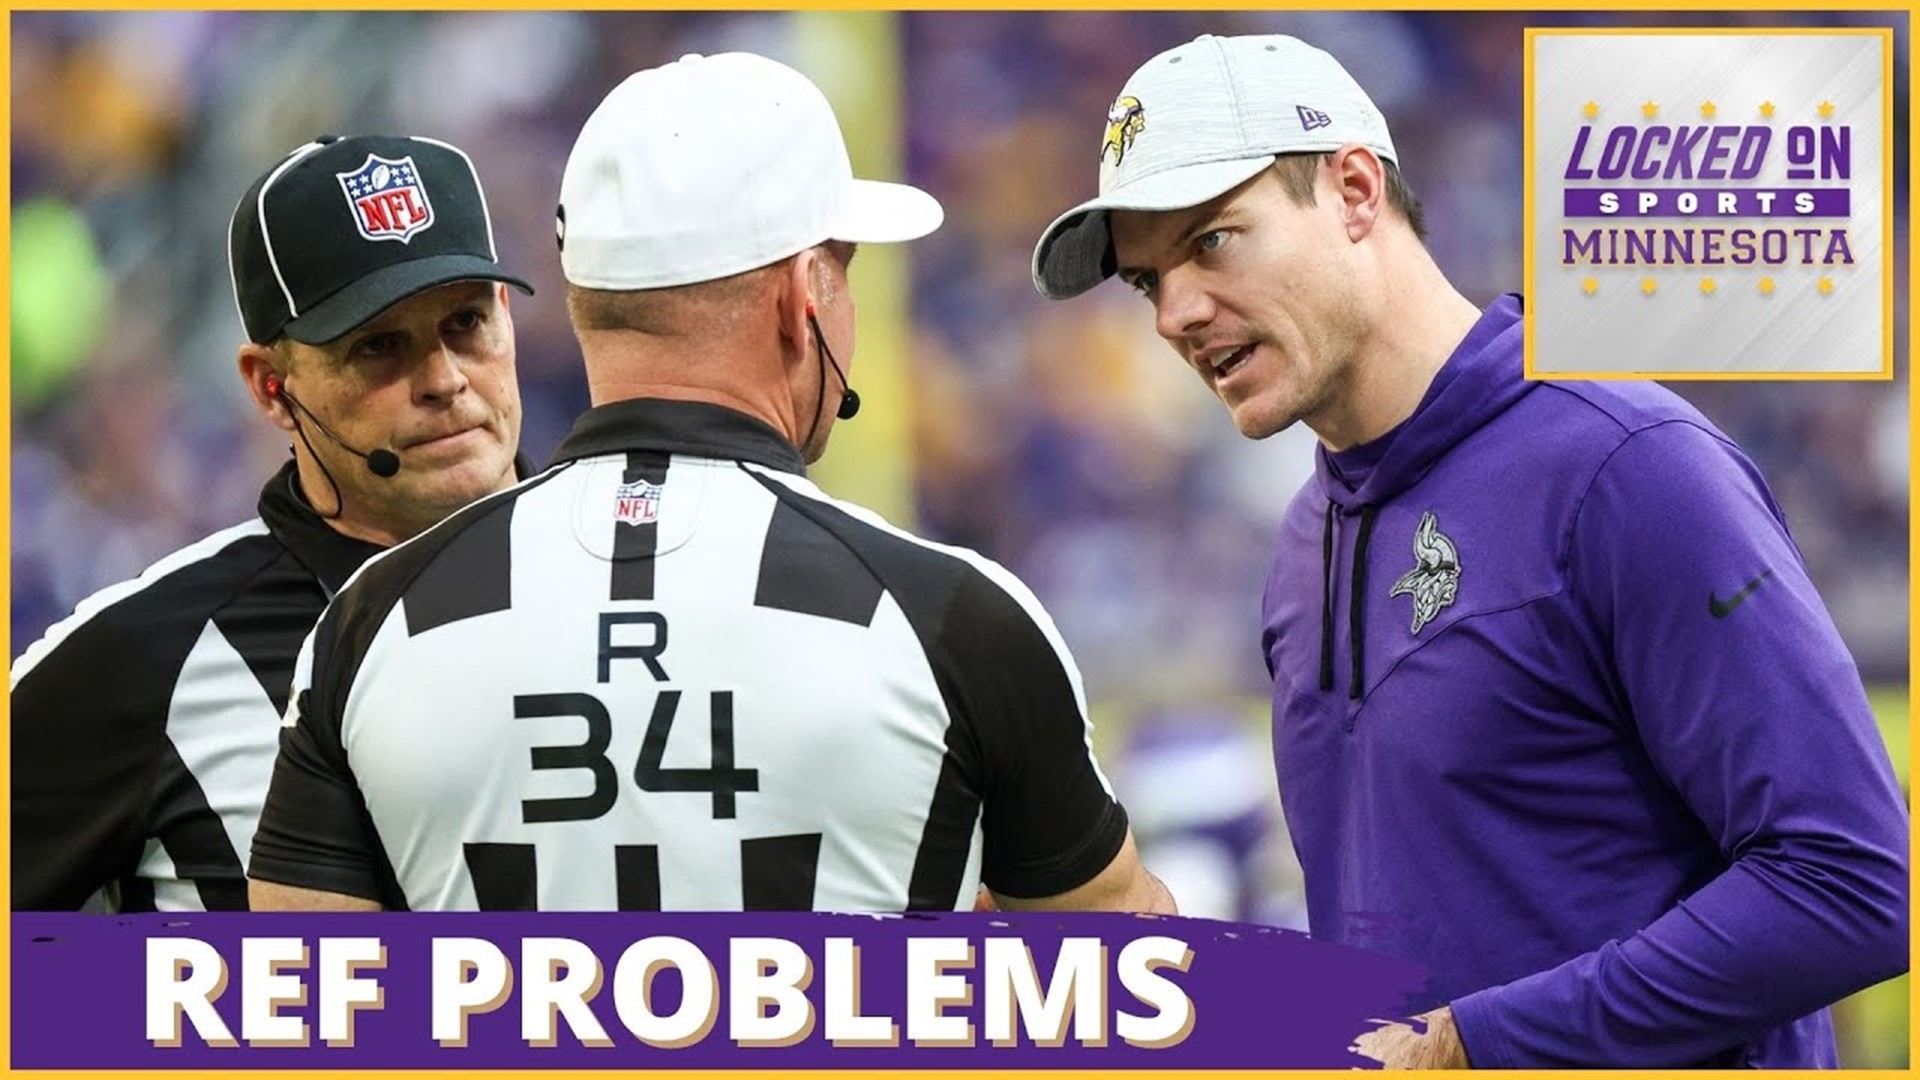 How can the NFL fix its officiating problem? KARE 11’s Reggie Wilson joins to discuss the options the league has to limit the blown calls at pivotal points in games.